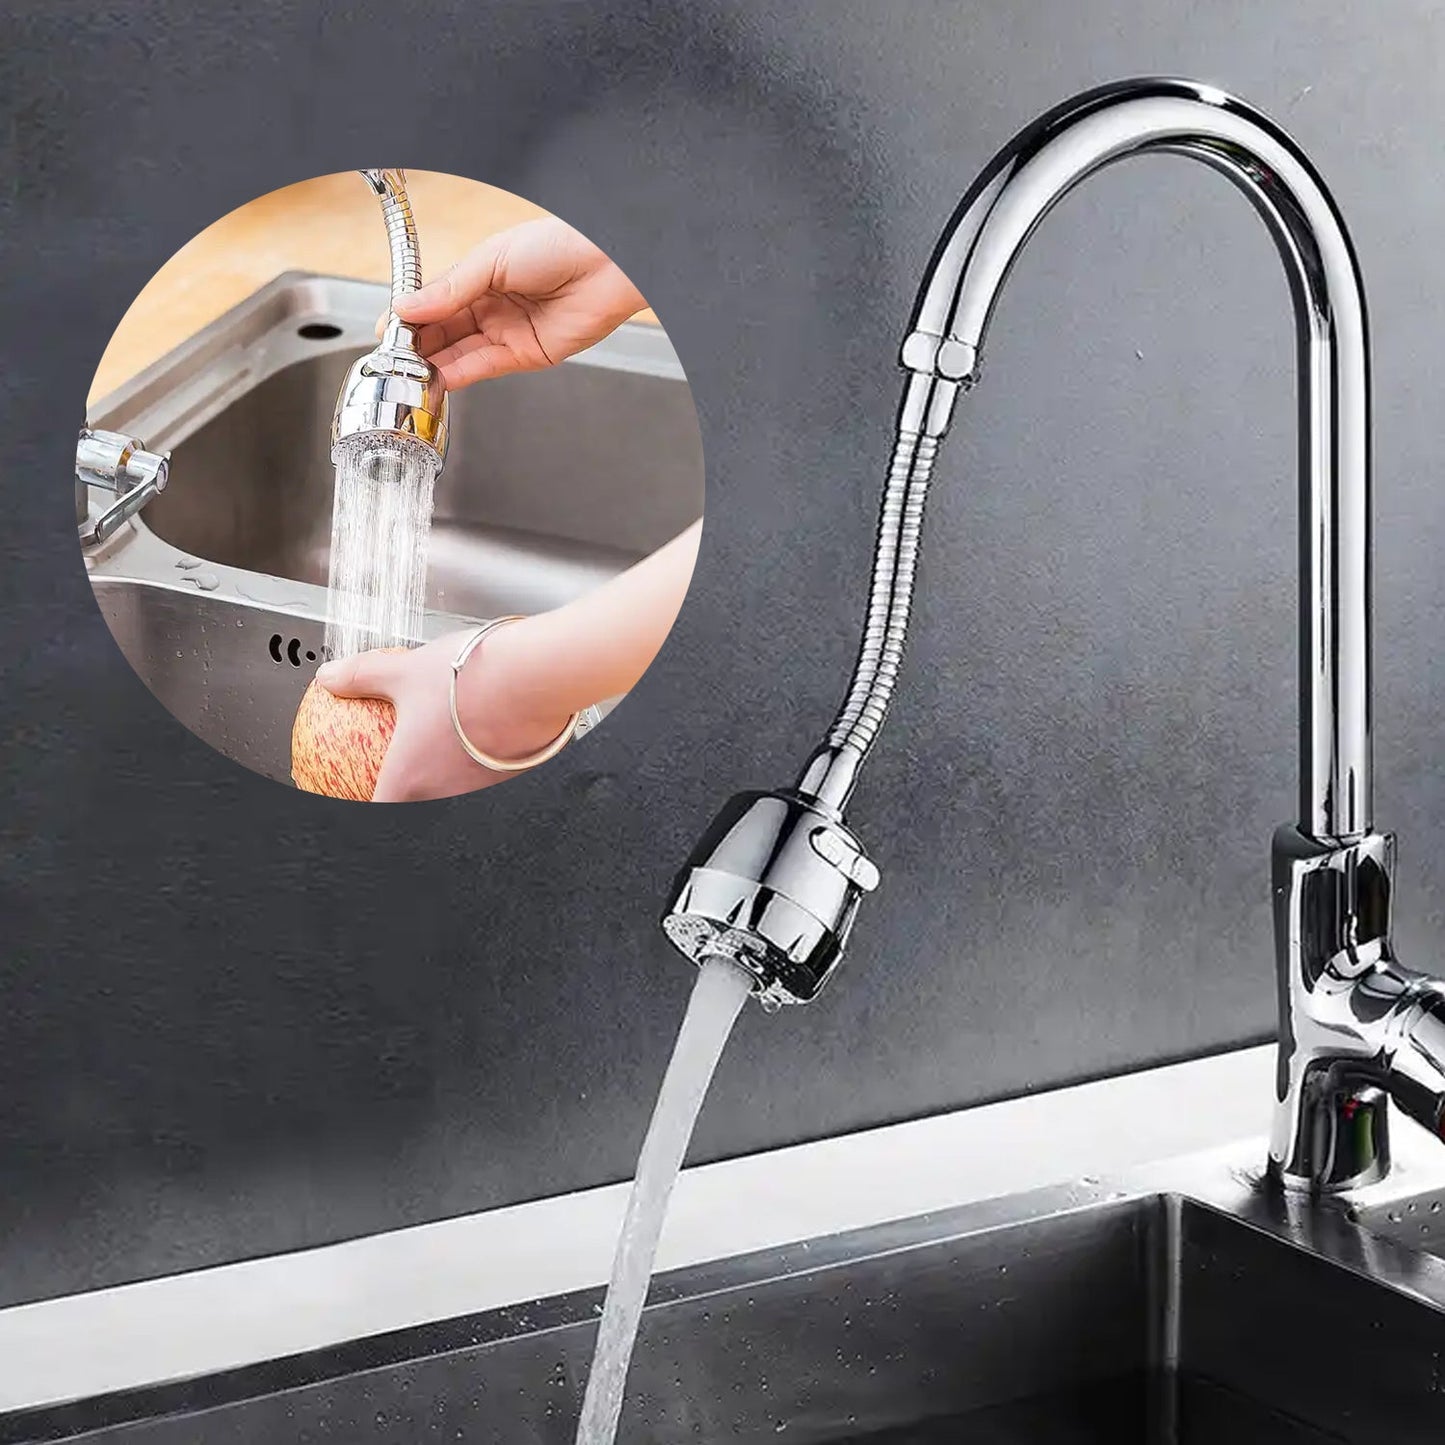 0538 Kitchen Faucet Extender Water Swivel Faucet 360 Degree Rotatable Faucet Sprayer Head Double Mode Water Saving Tap Adjustable Stainless Steel Spout Splash-Proof for Kitchen Bathroom (1 Pc)